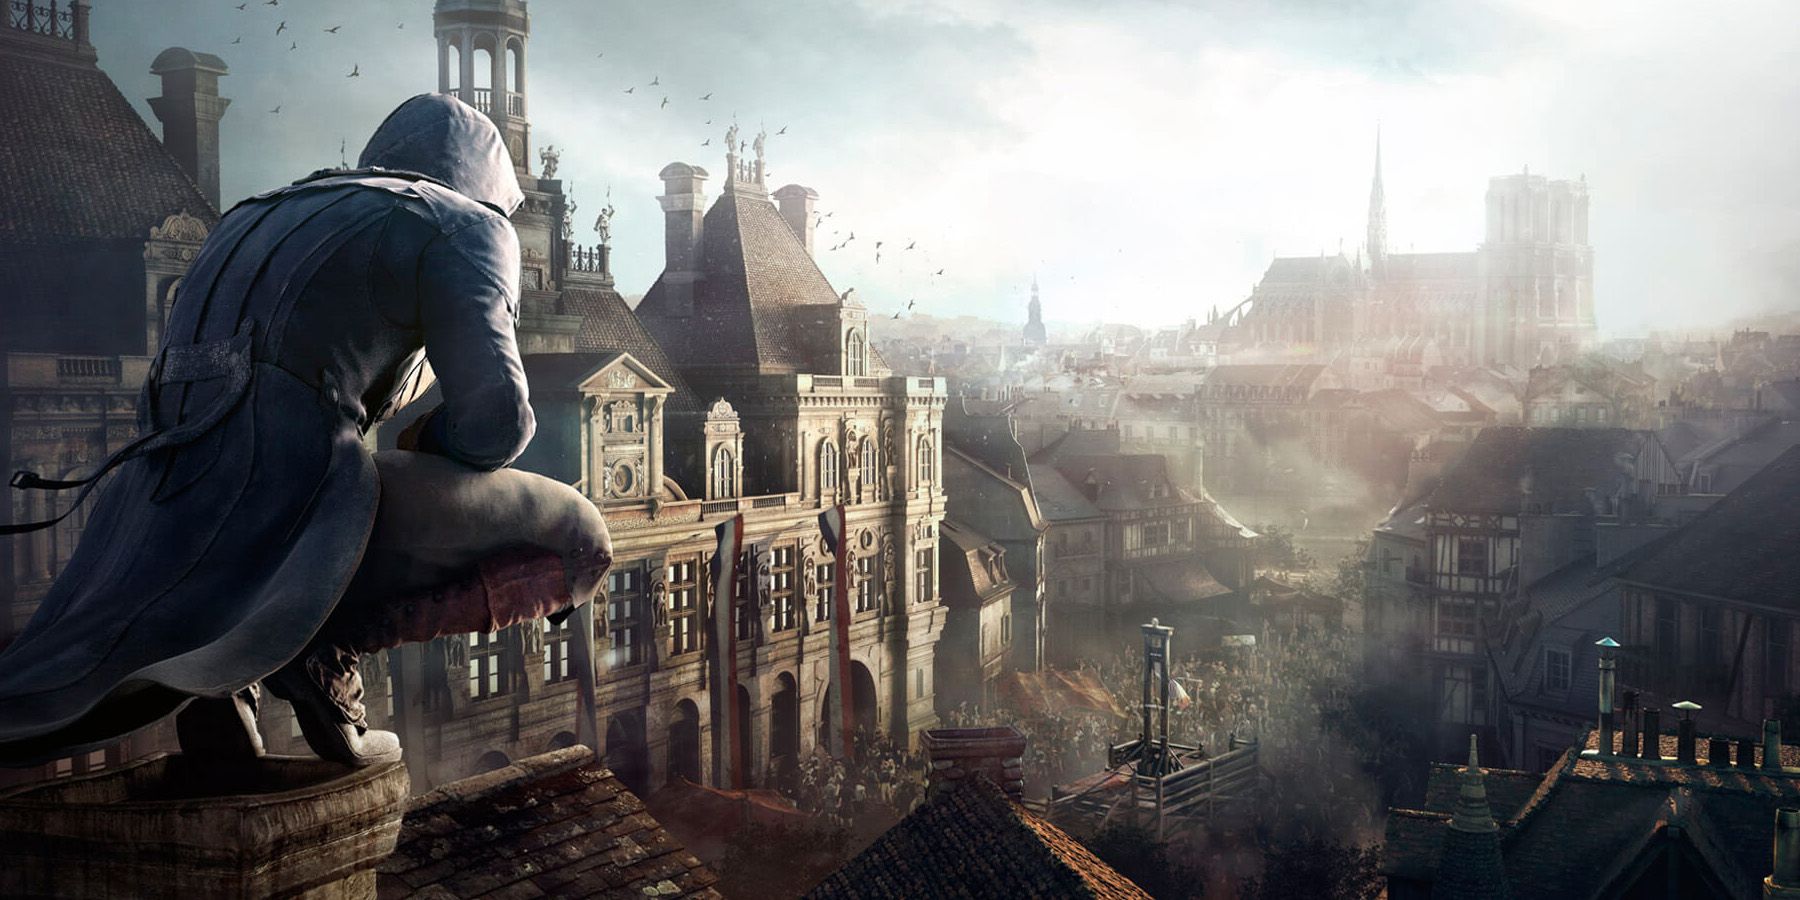 Arno crouching on a roof looking over Paris in Assassin's Creed Unity